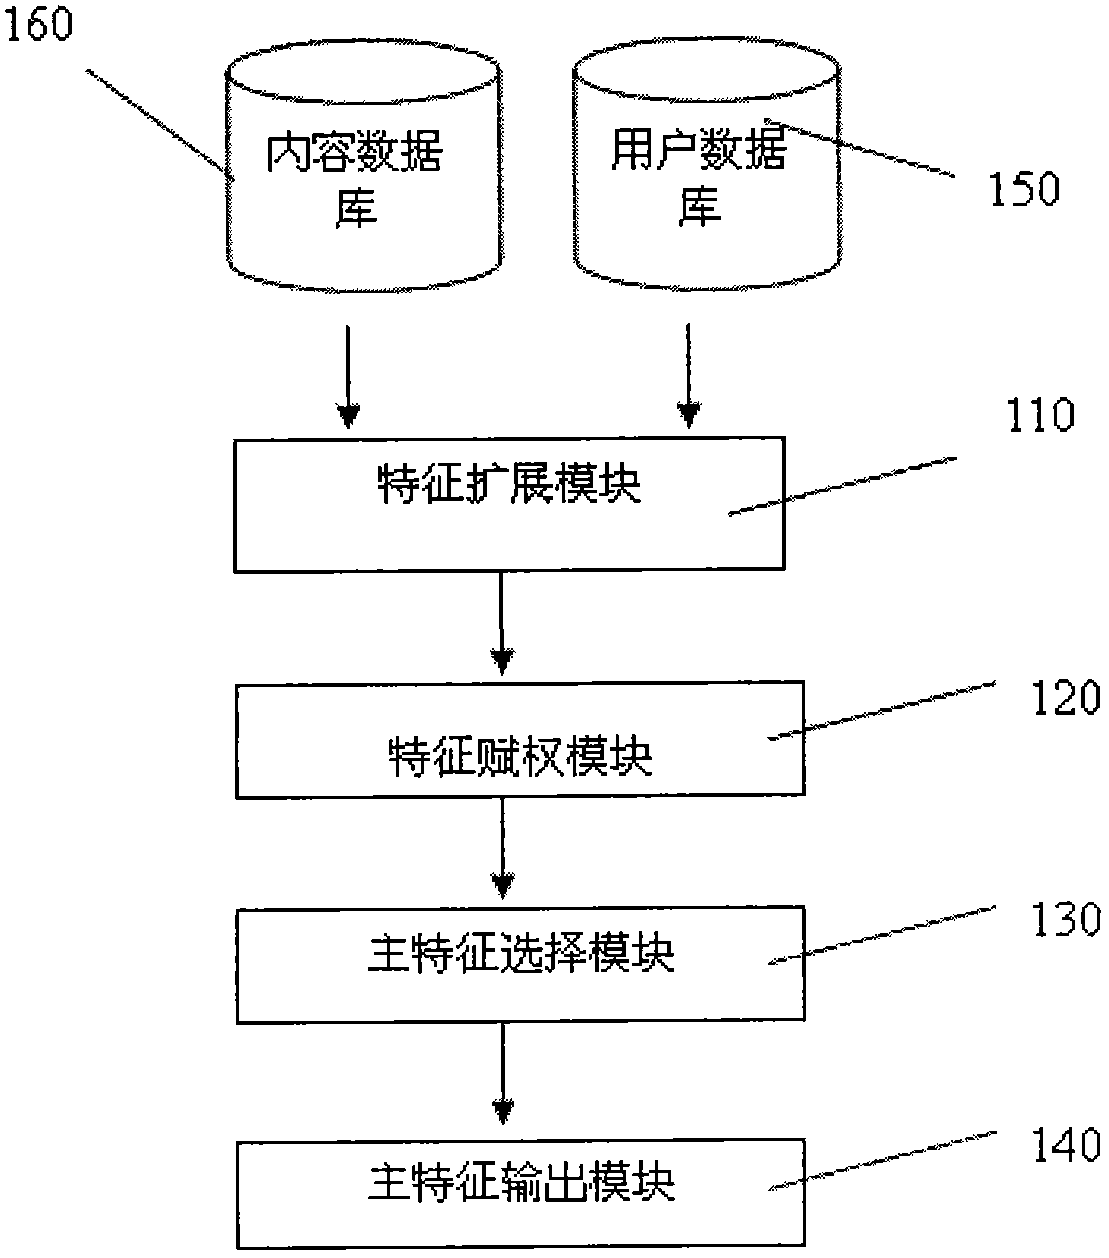 Propositional-logic-based principle feature analysis method and system in data mining